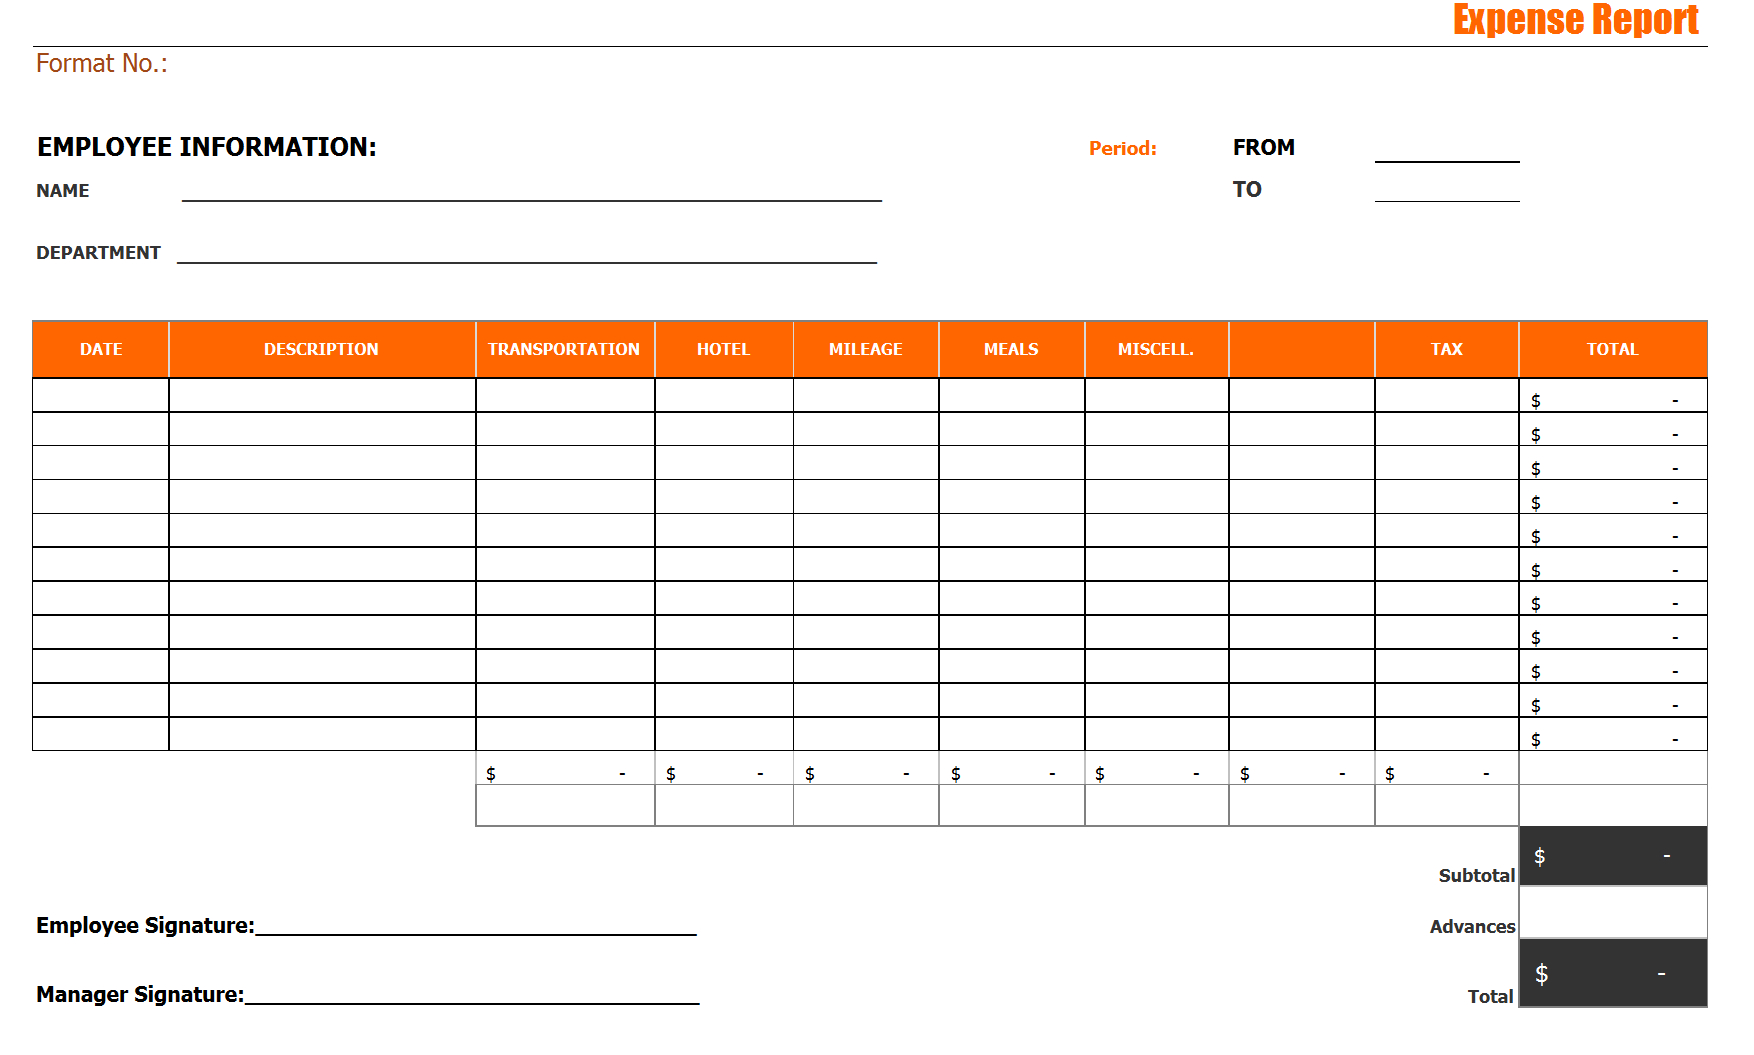 Basic Monthly Expense Report Template With Blank Form And With Regard To Daily Expense Report Template